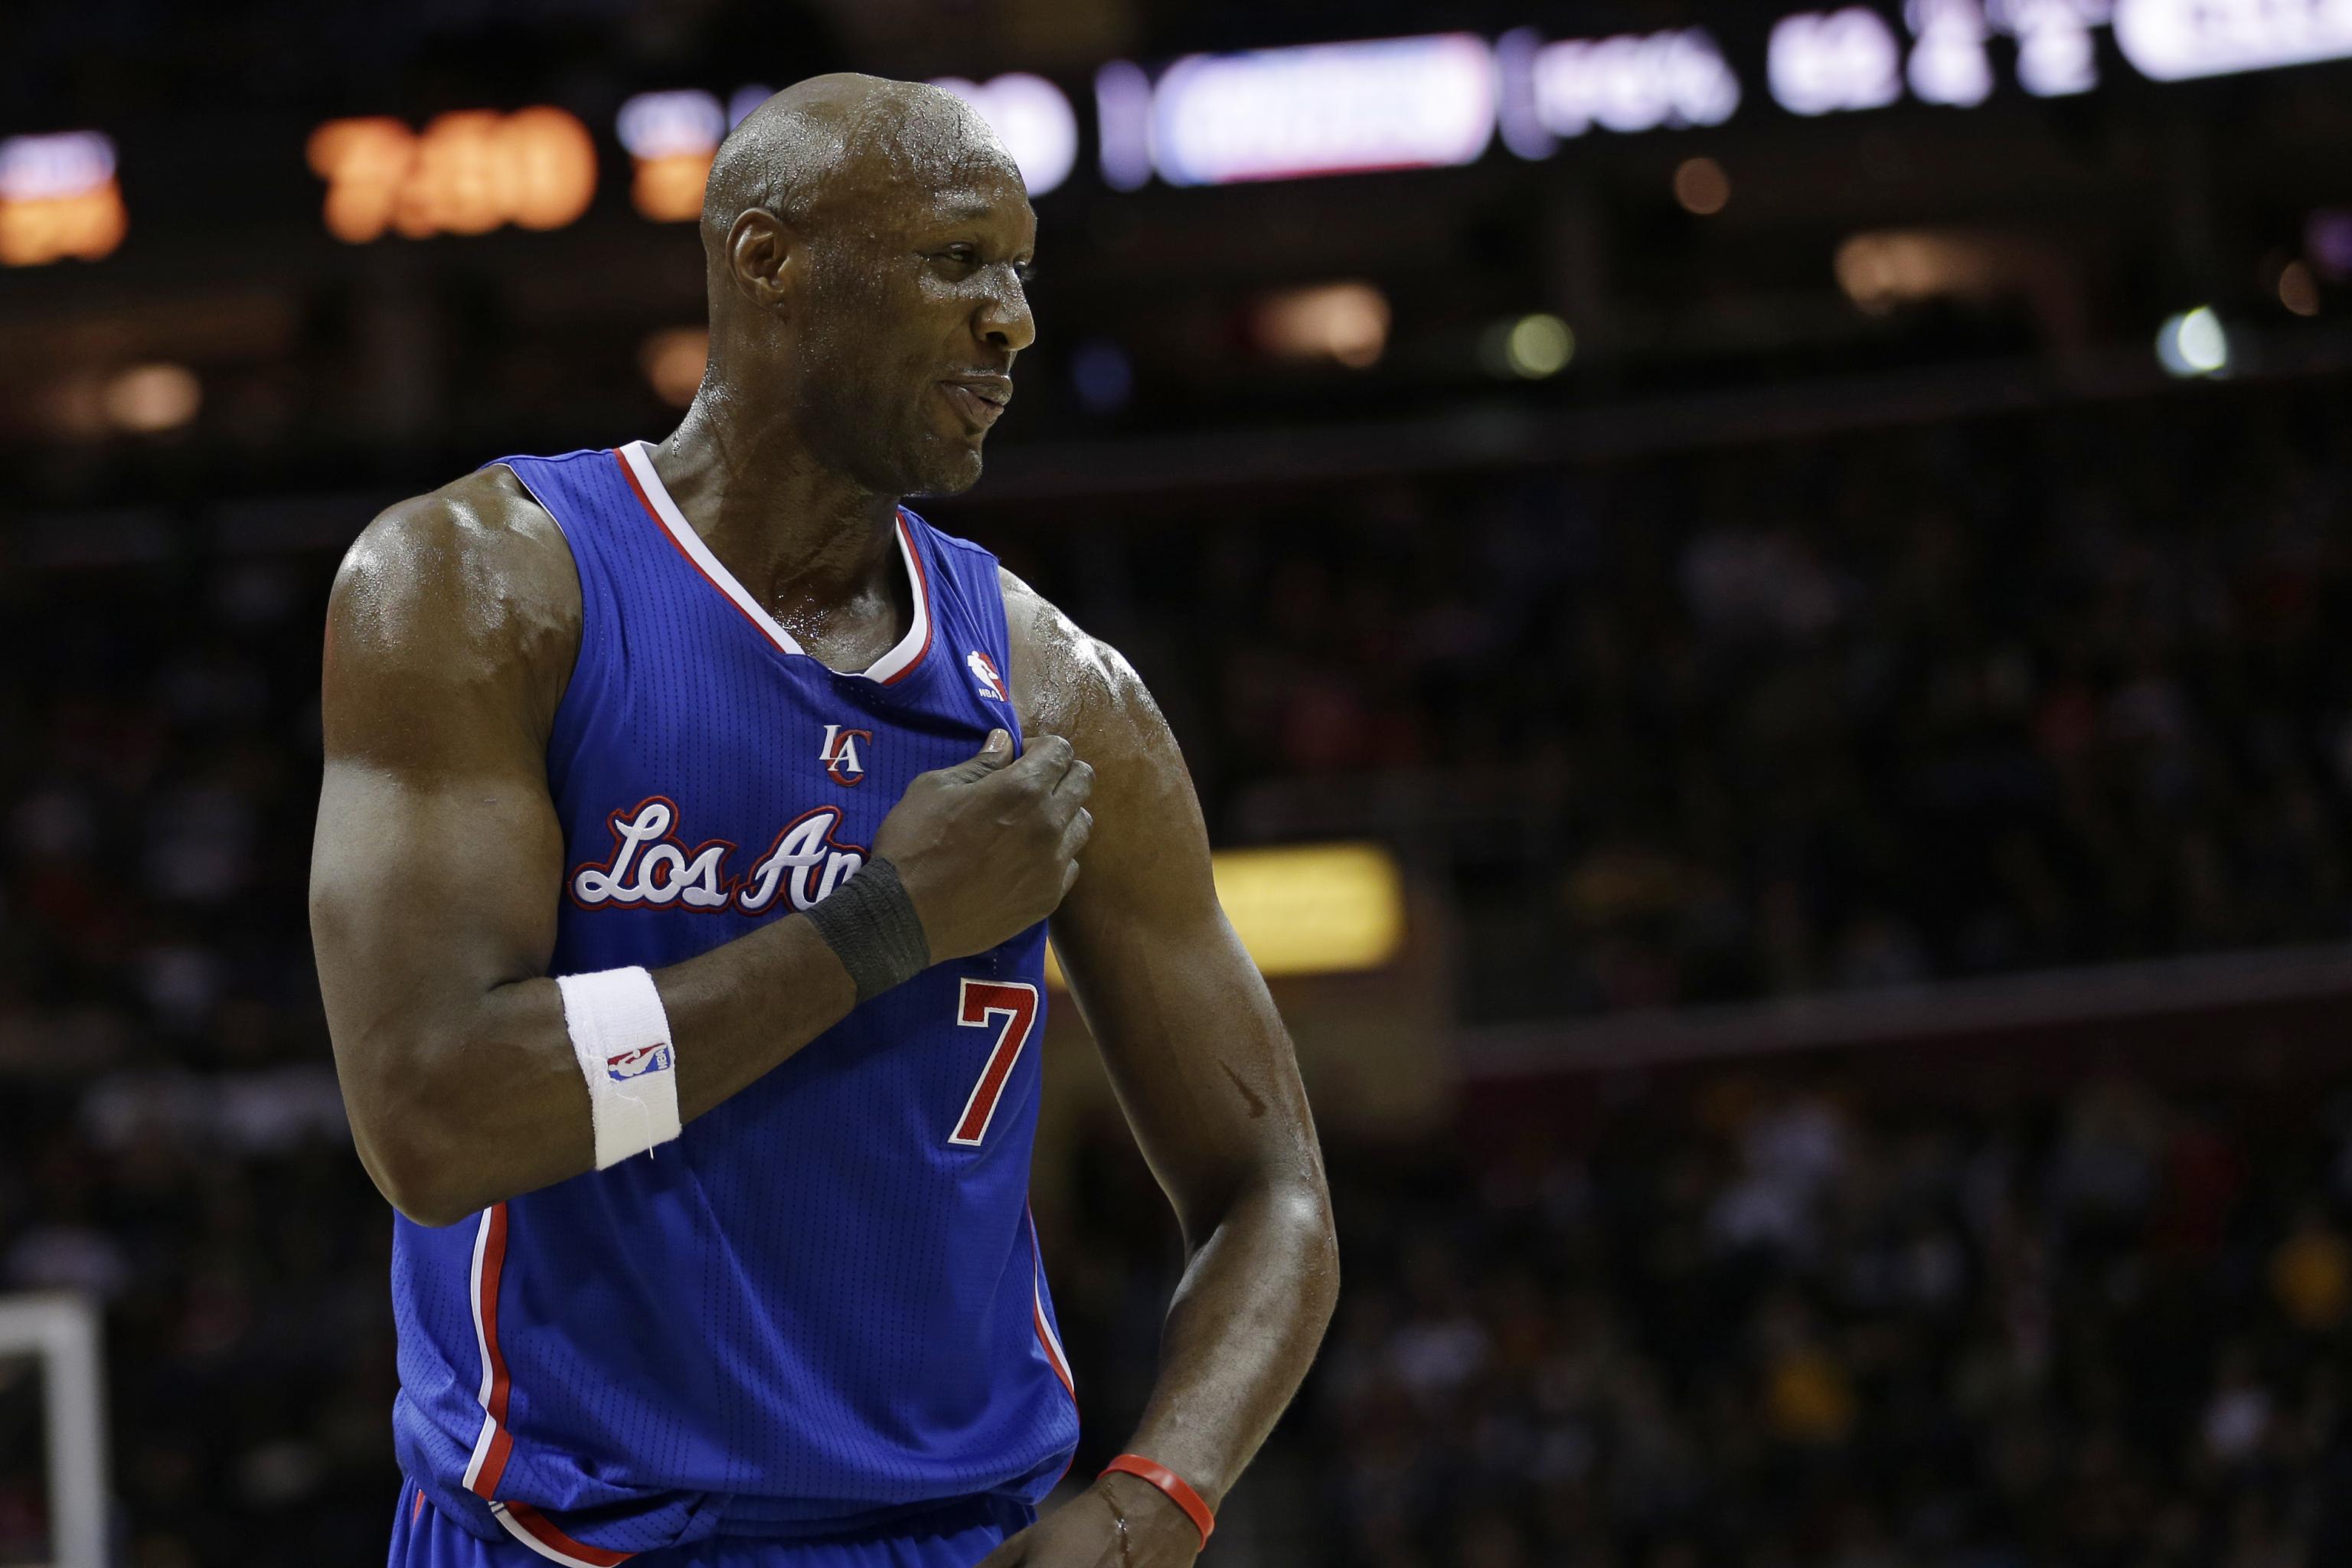 Latest on Lamar Odom's Recovery After Being Found Unconscious in